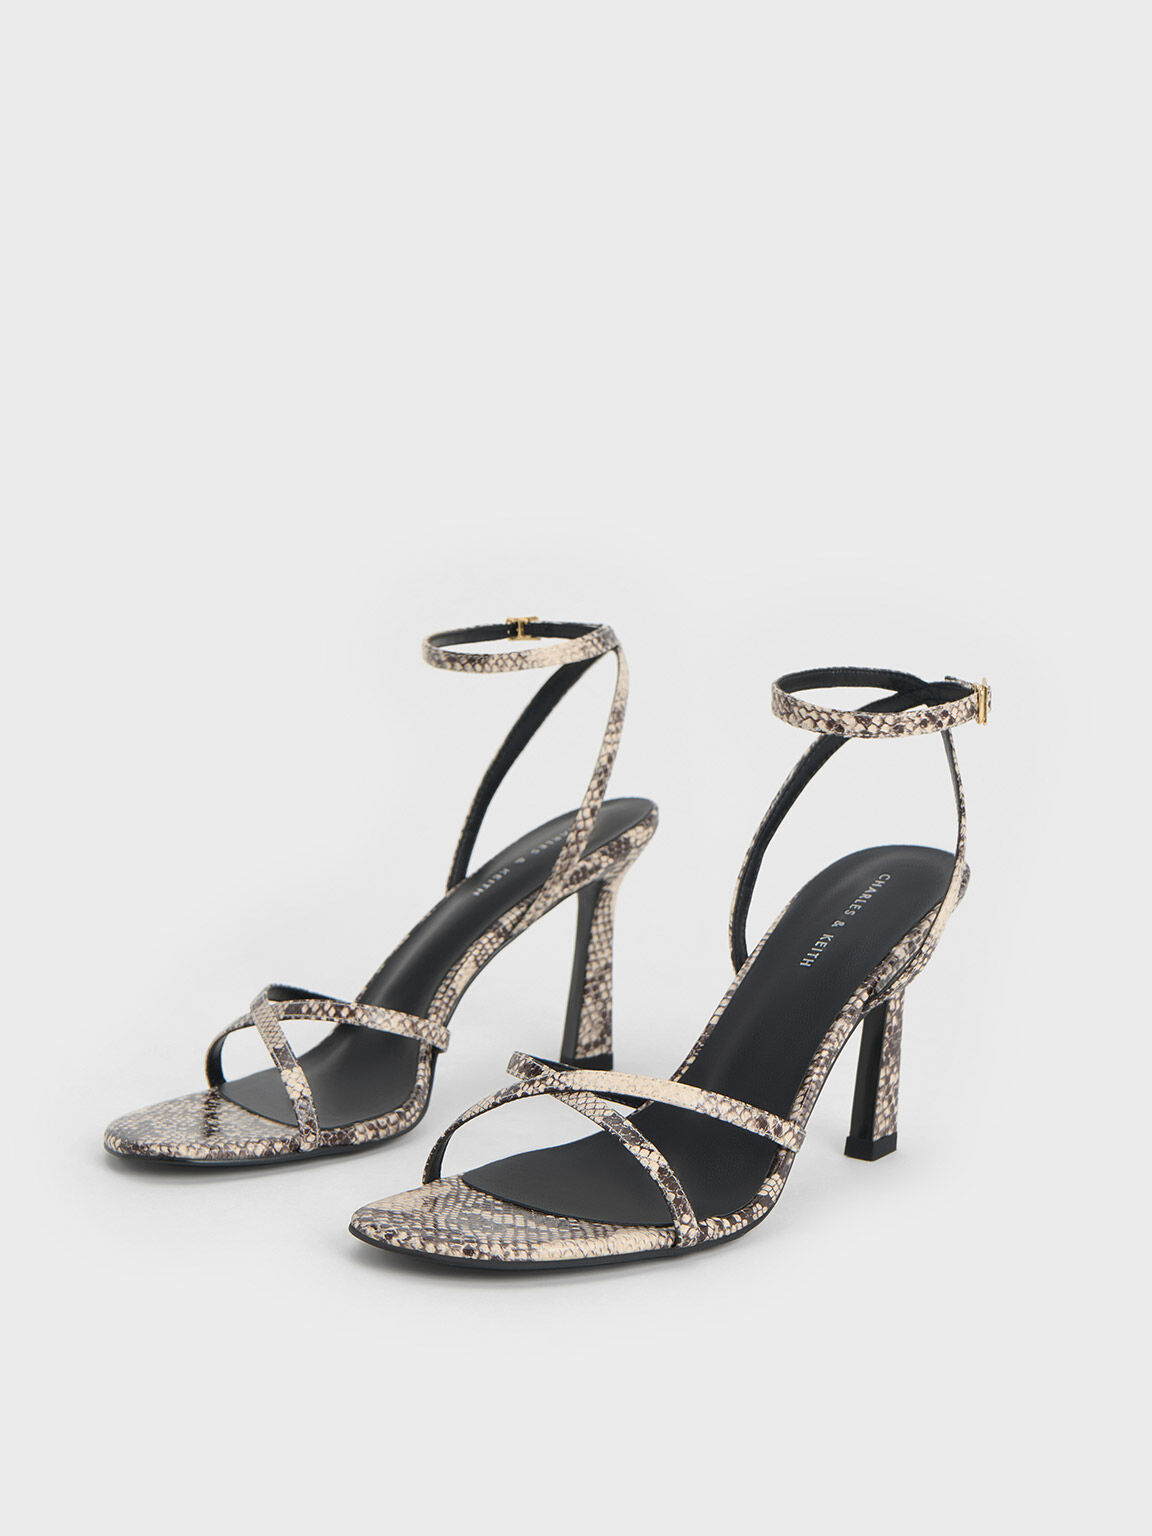 New Look clear strap heeled sandals in black | ASOS